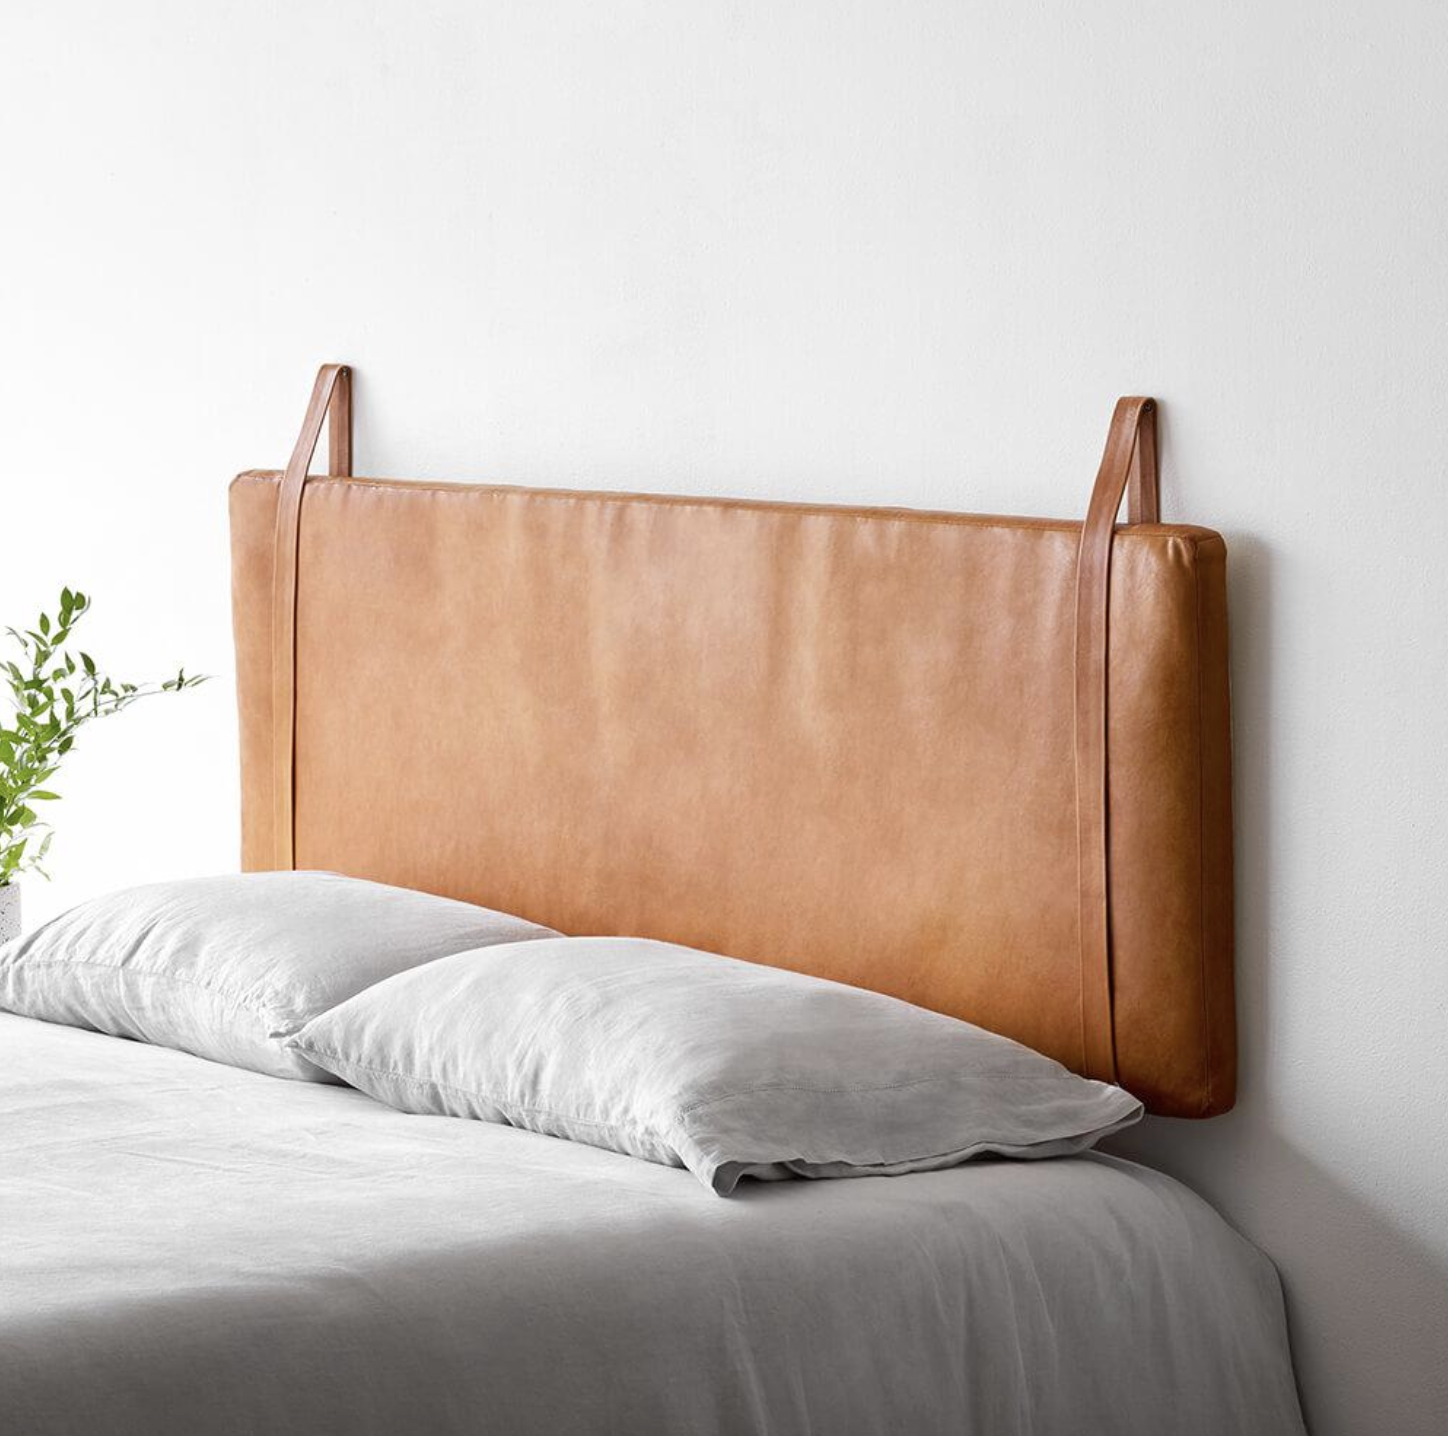 9 Wall Mounted Floating Headboards We, How To Attach Large Headboard Wall